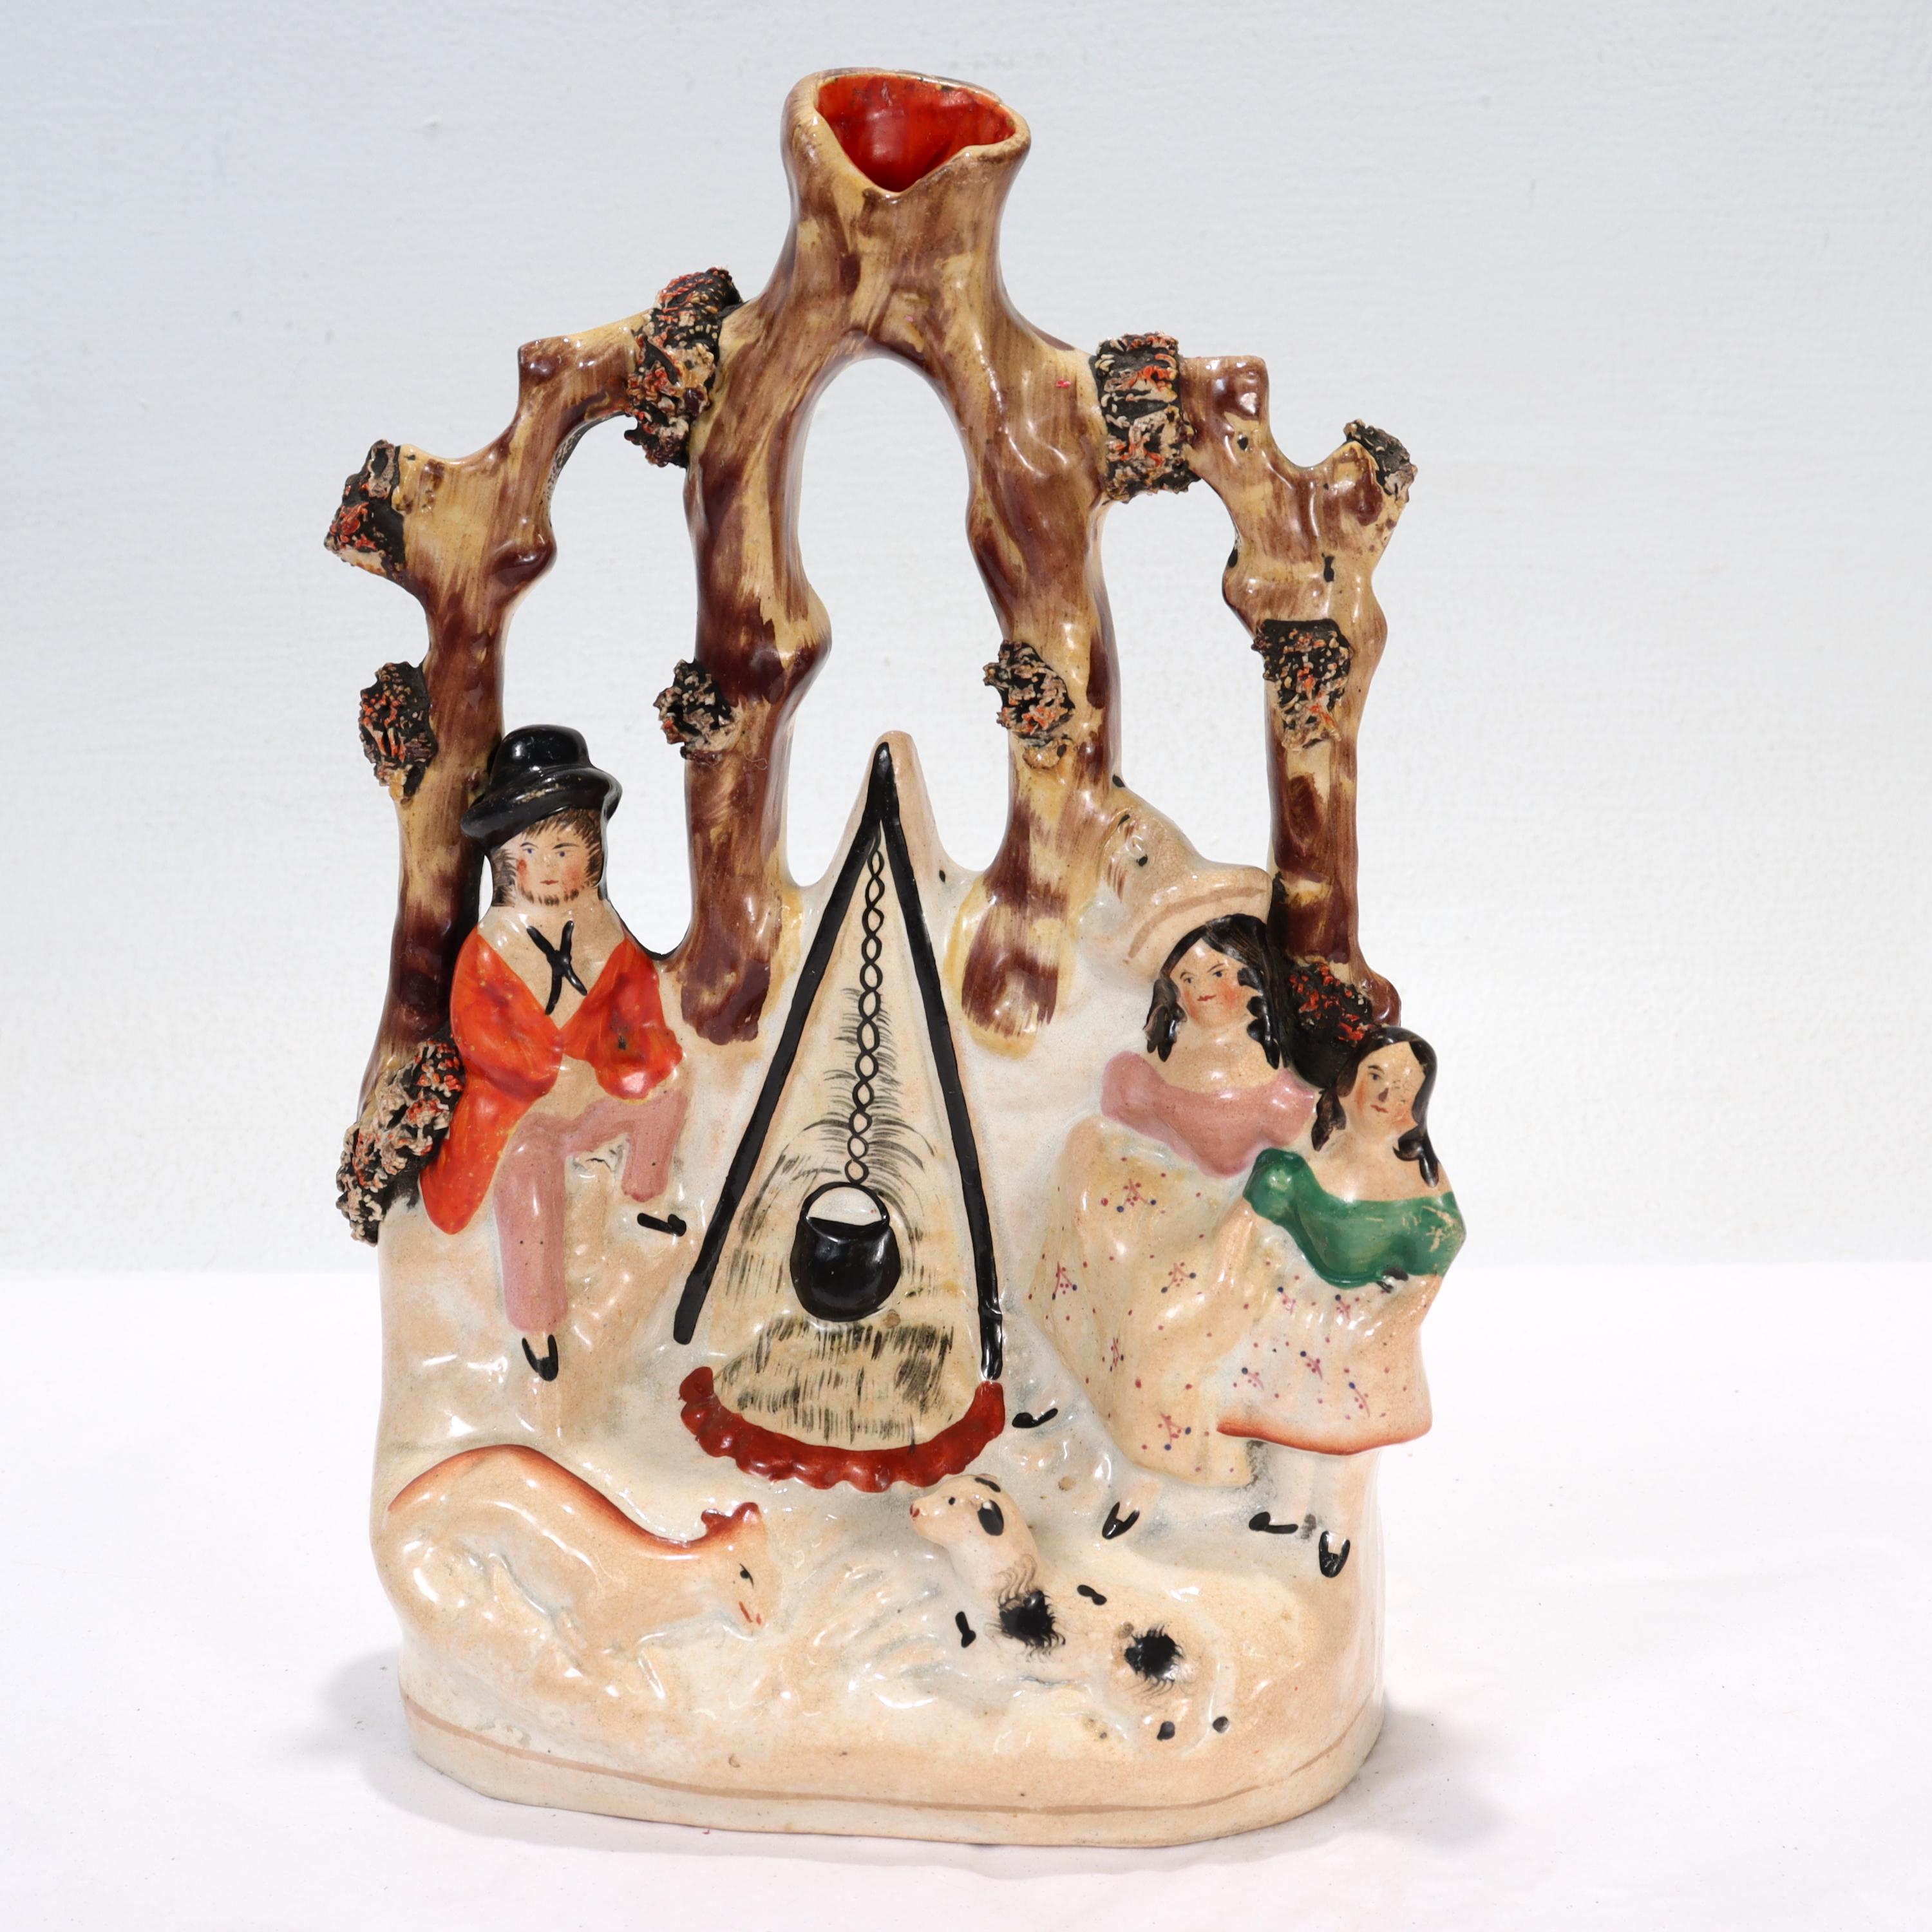 A fine antique Staffordshire pottery figural flat back spill vase.

In the form of a gypsy family with livestock gathered around a cooking fire in a forest.

Simply a rare and wonderful Staffordshire pottery figurine! 

Date:
19th Century

Overall